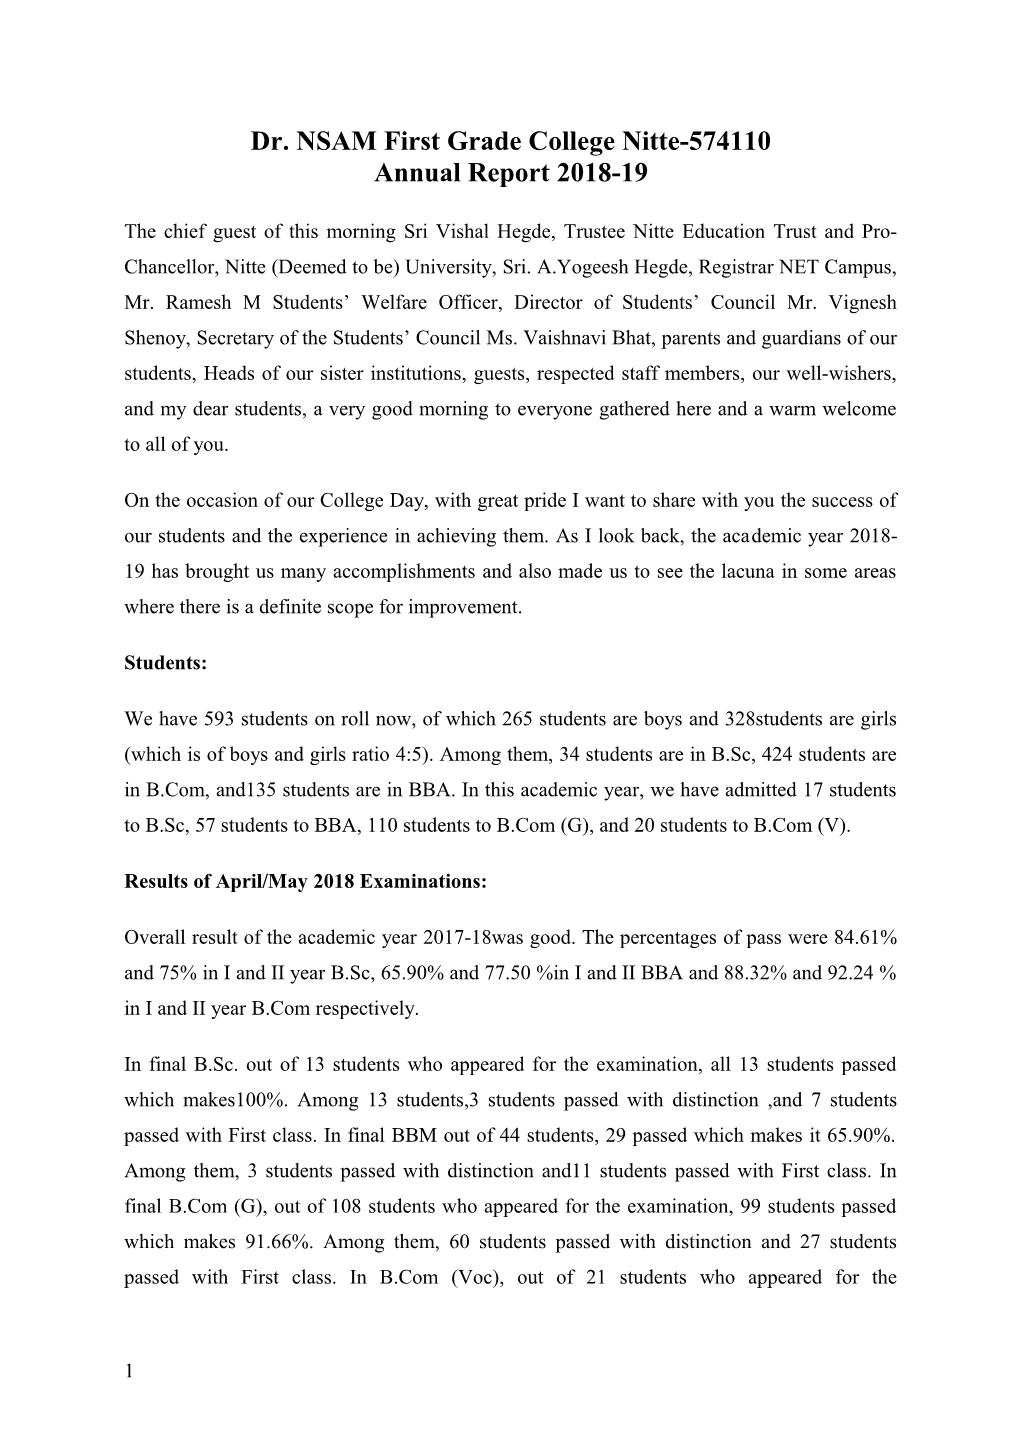 Dr. NSAM First Grade College Nitte-574110 Annual Report 2018-19